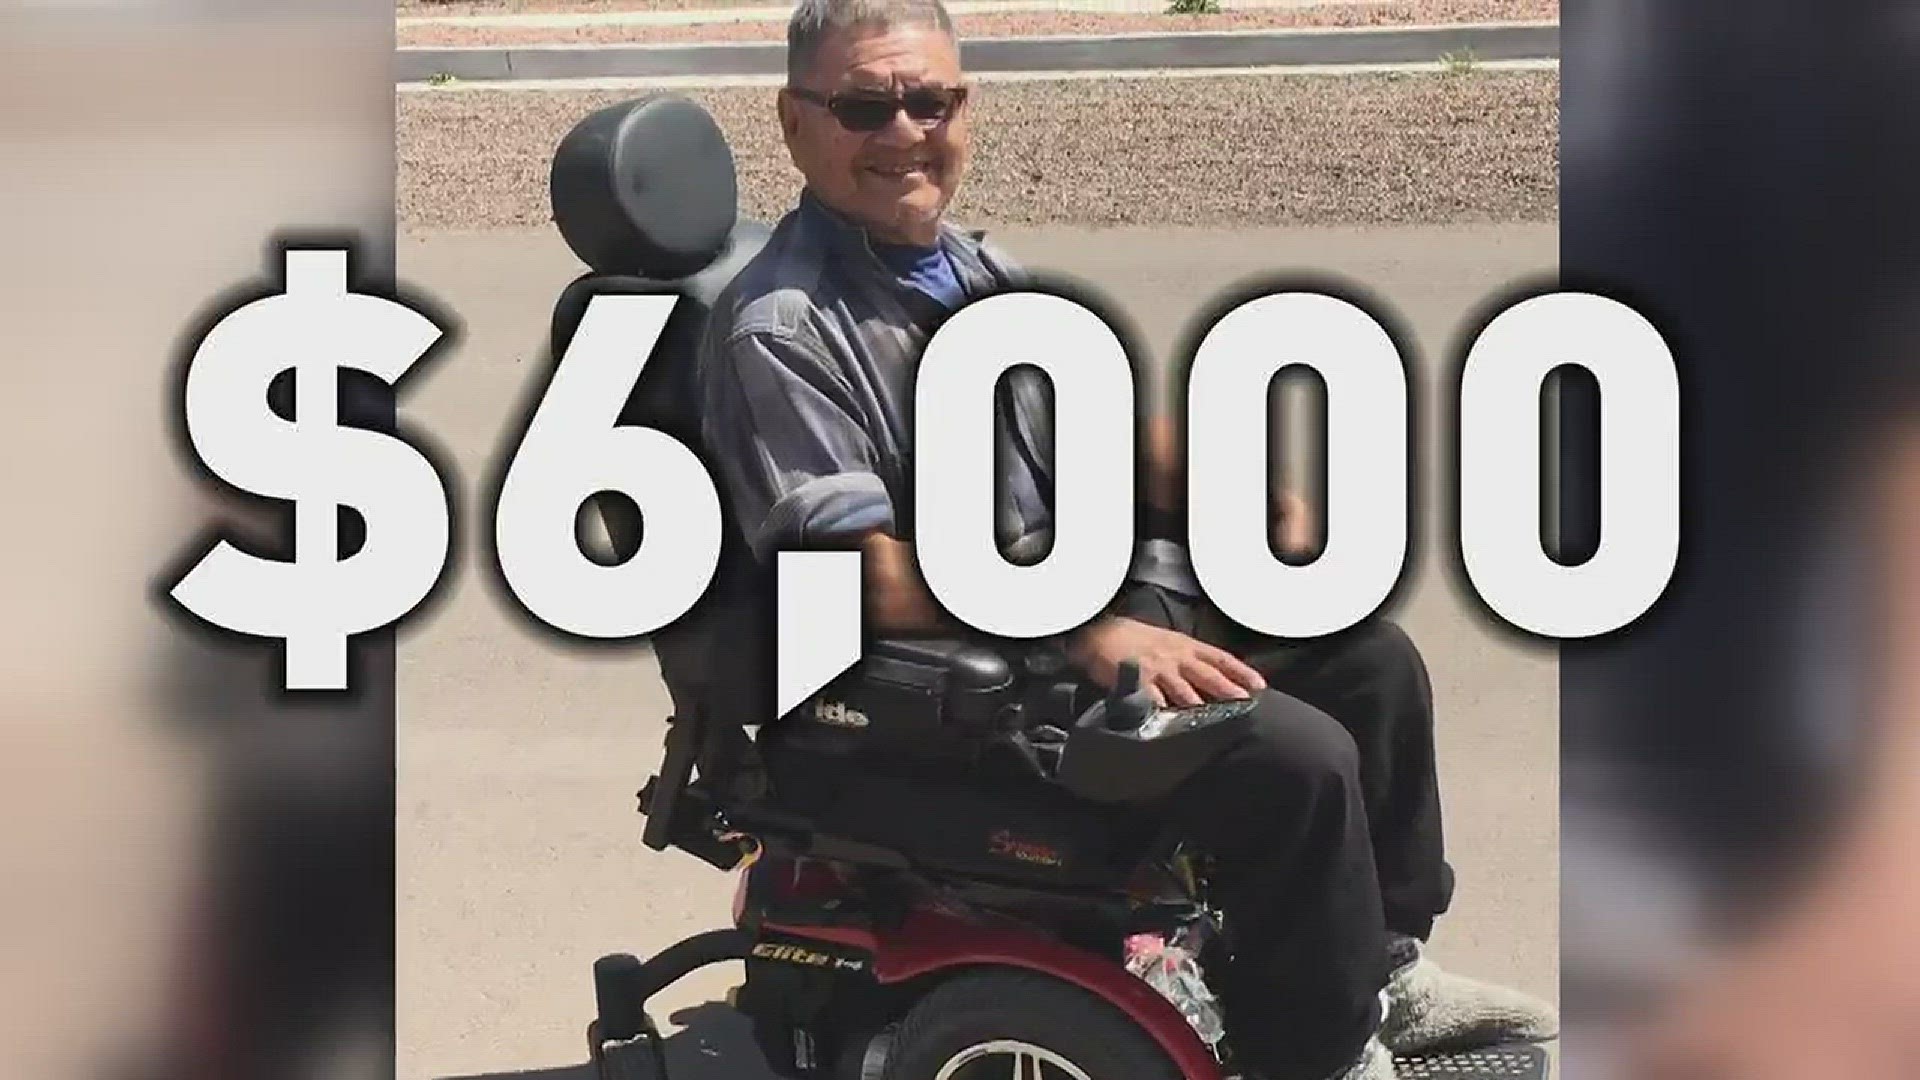 Bernie Montoya likes to mow the lawn, hike and get around but his wheelchair kept burning out so he contacted Call 12 for help.